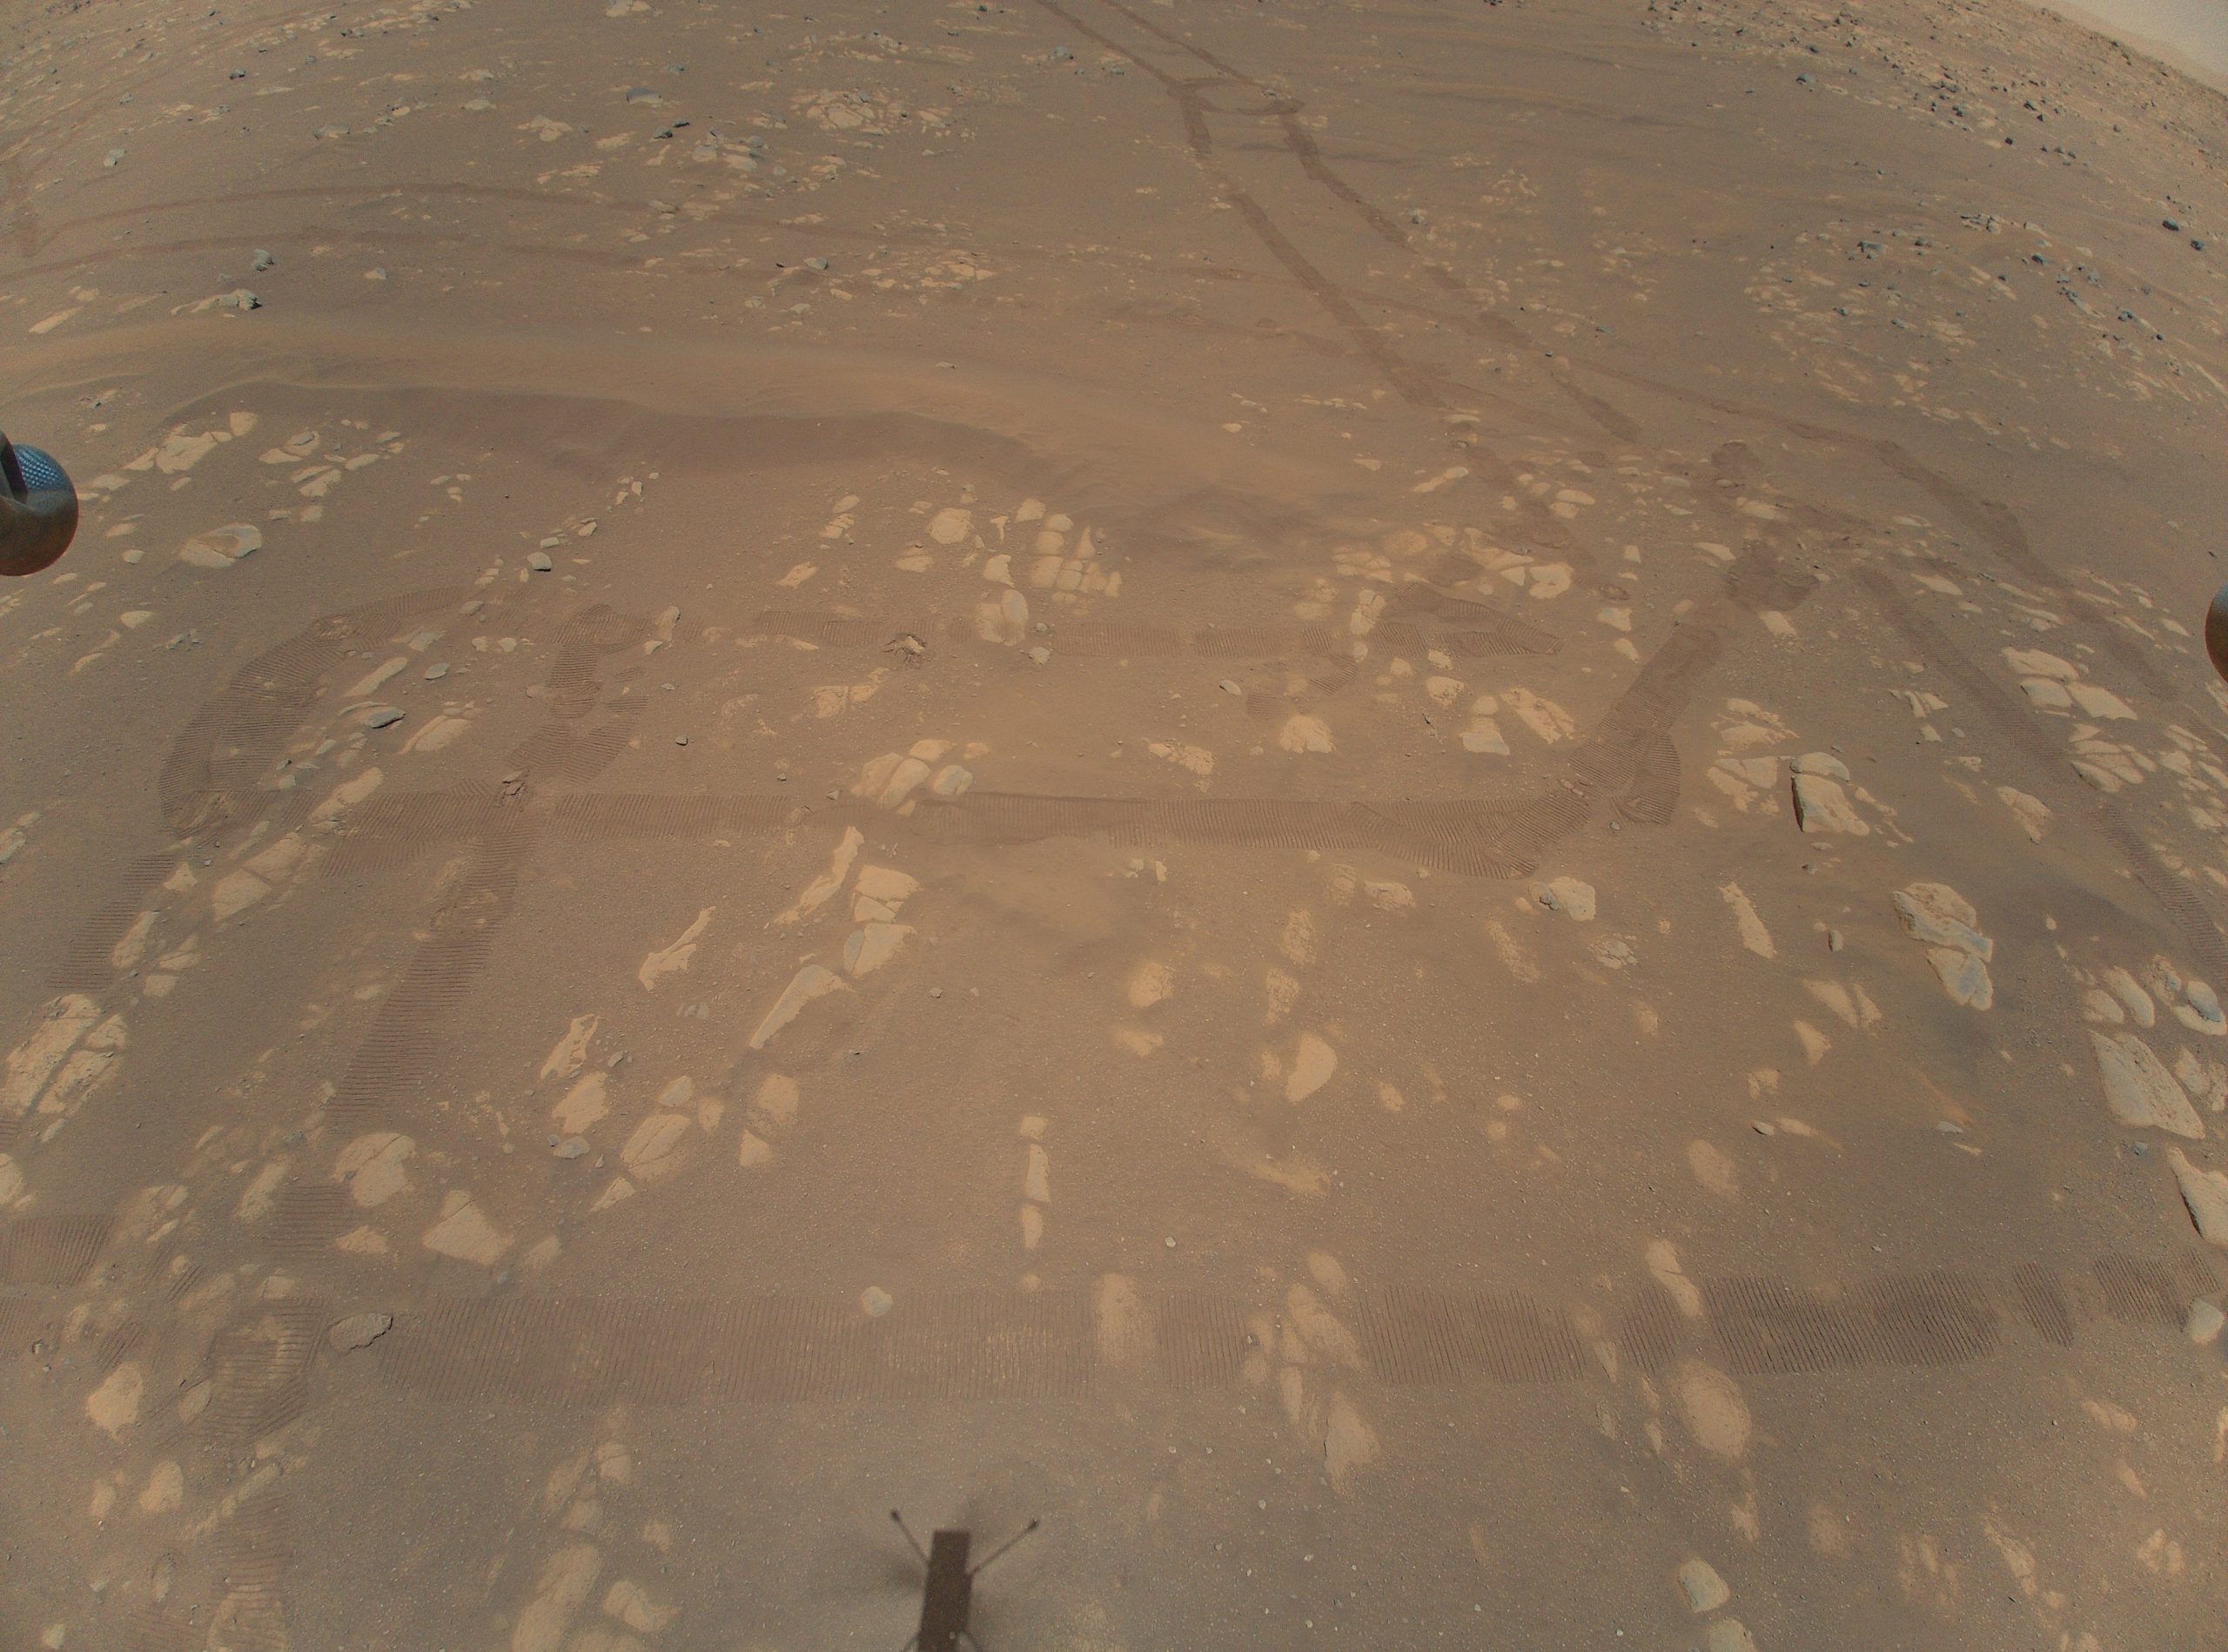 ingenuity shadow approaches perseverance rover wheel tracks in mars red dust